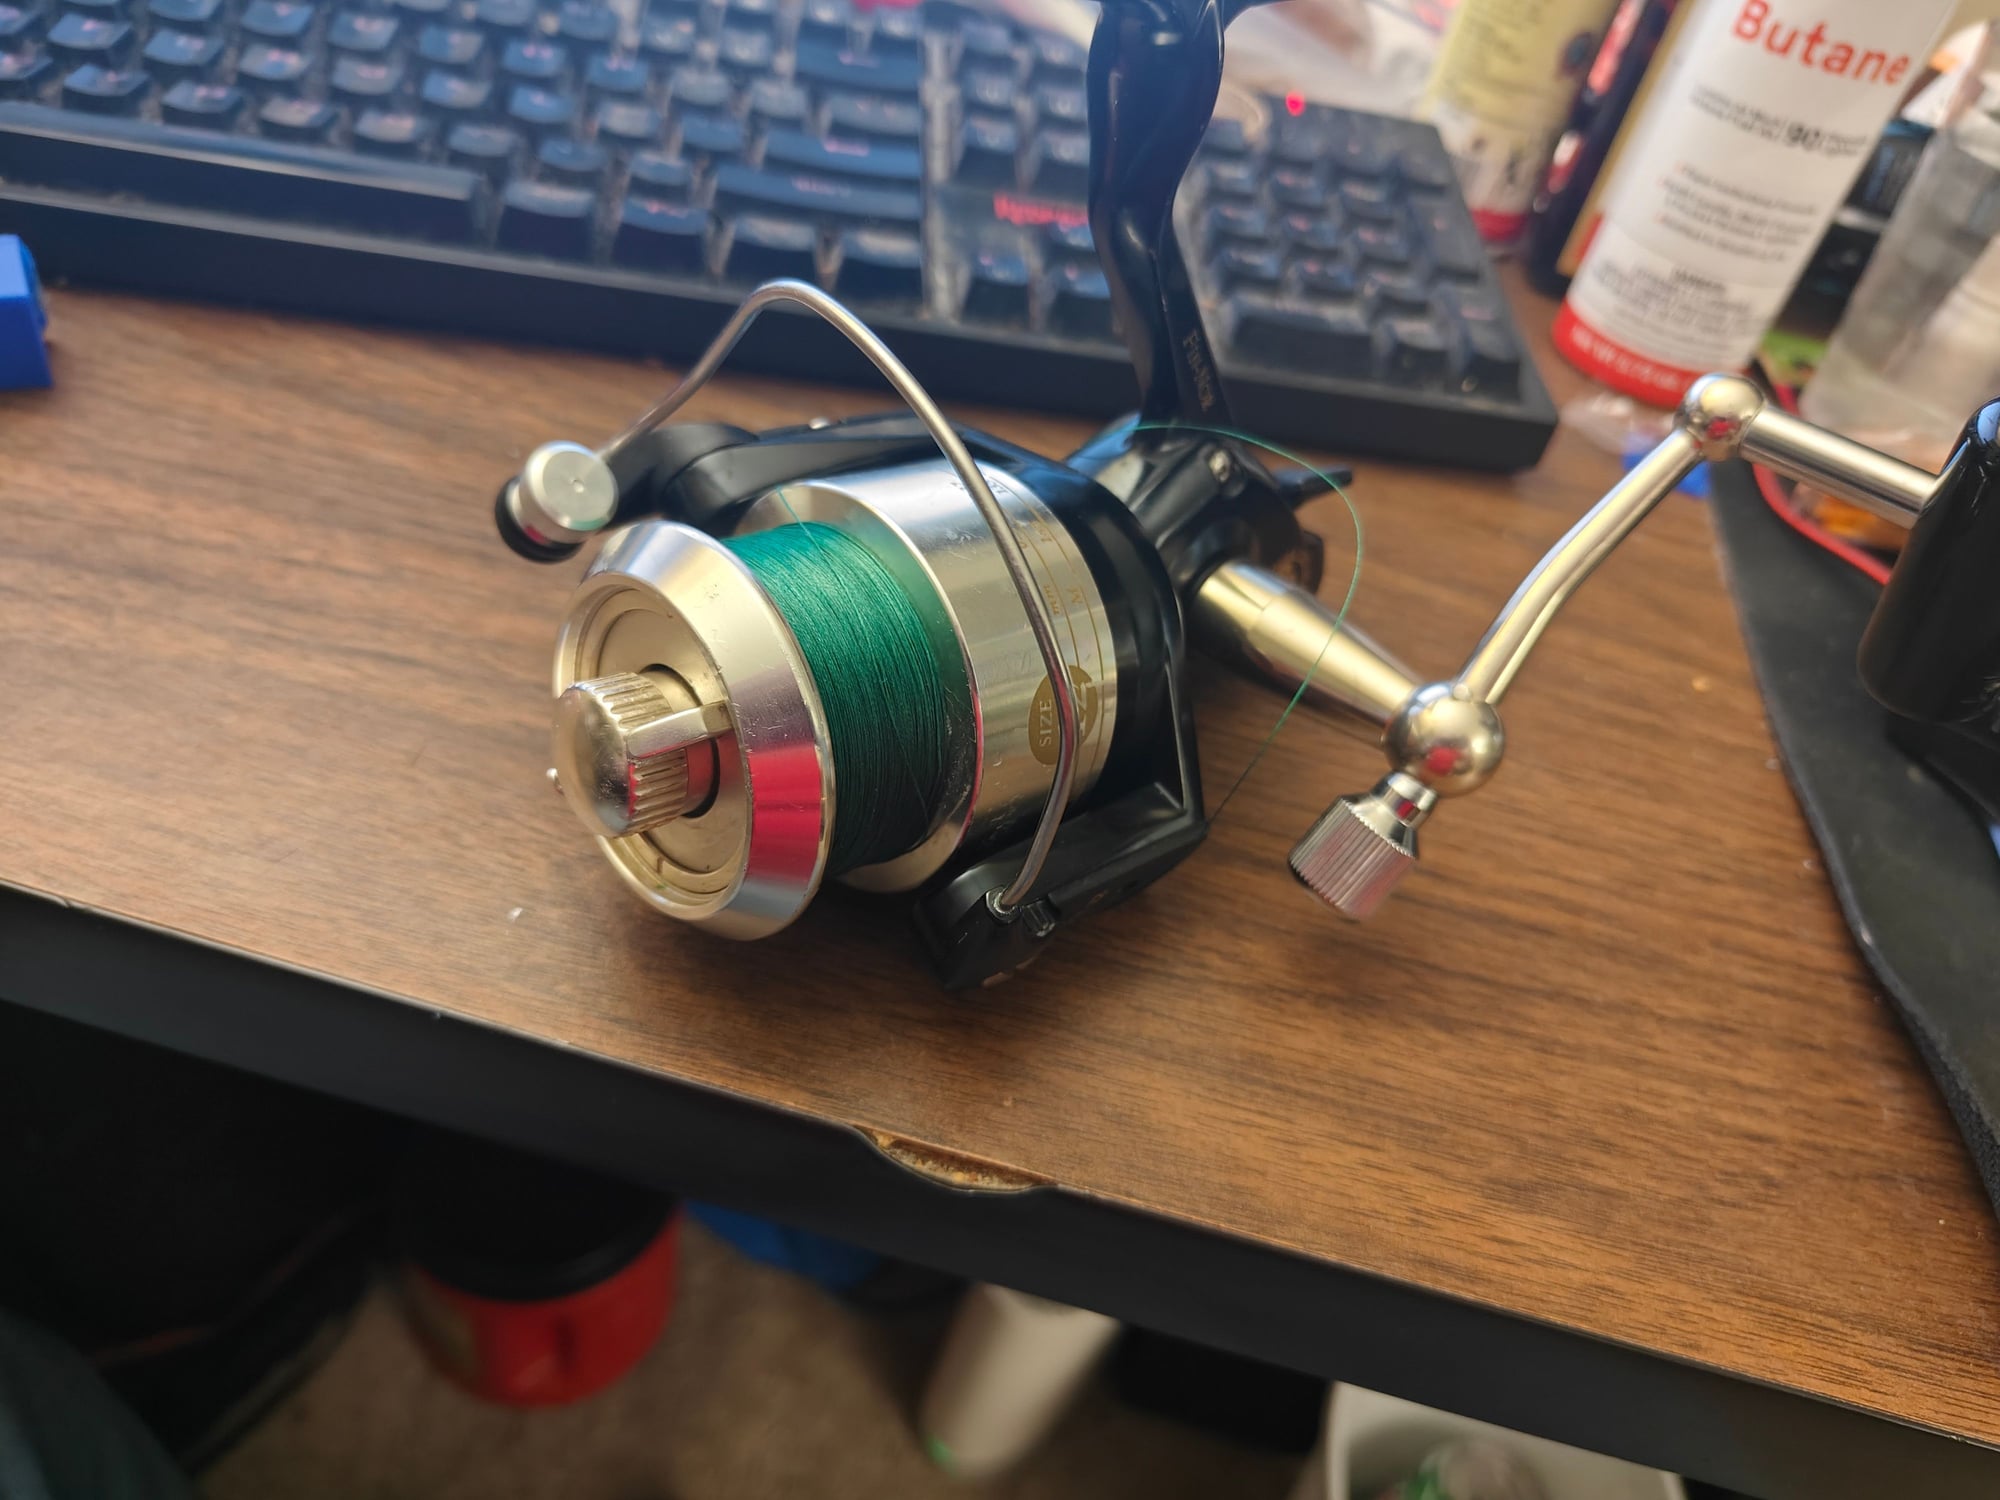 Can someone tell me how to use this Fin-Nor Spinning reel? - The